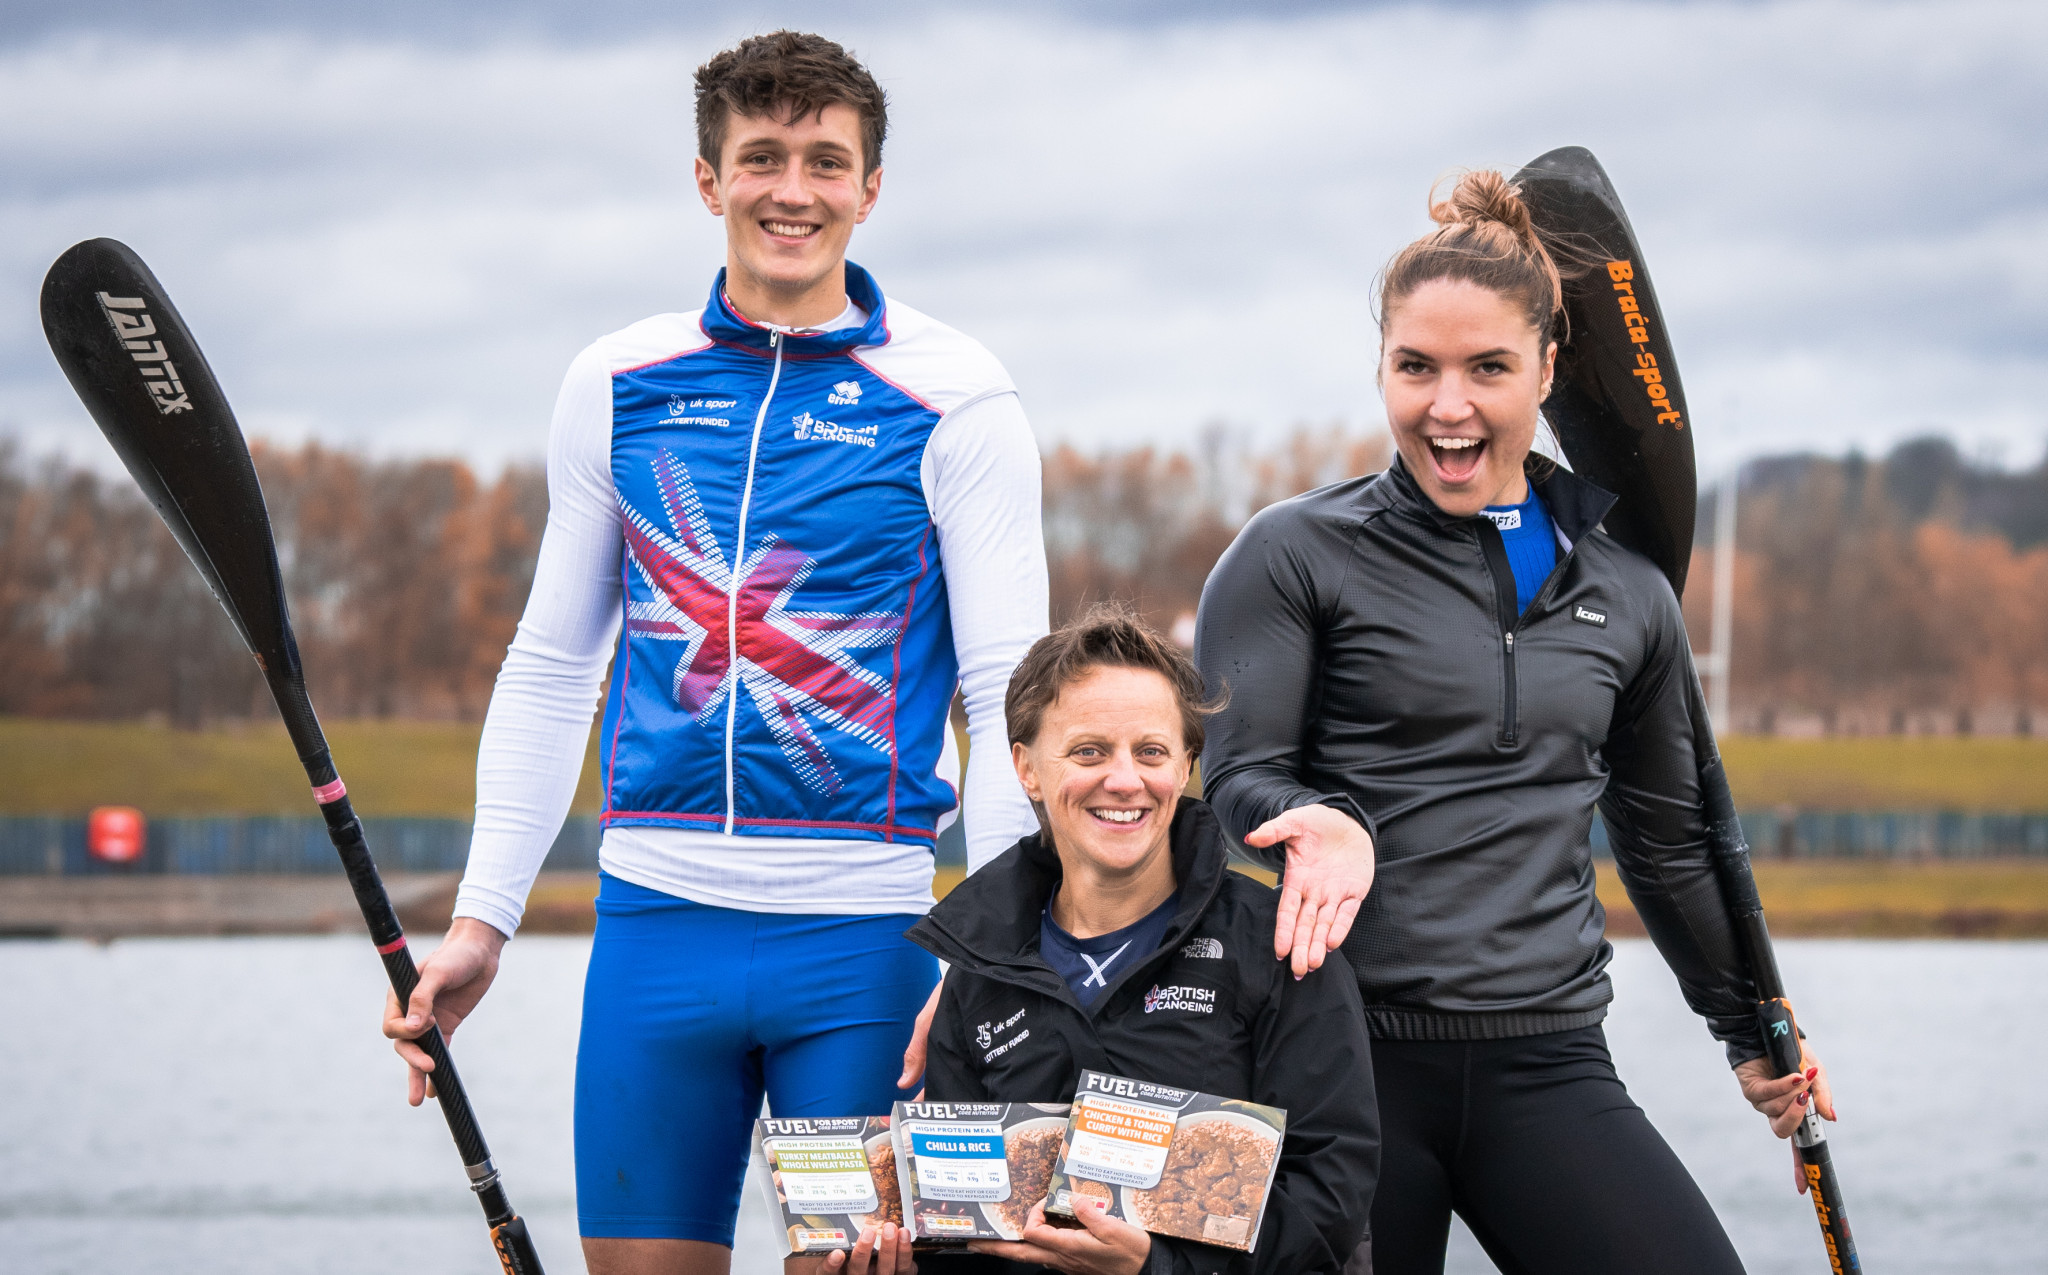 British Canoeing have announced ready-made sports meal company Fuel for Sport as its official performance meal provider ©British Canoeing